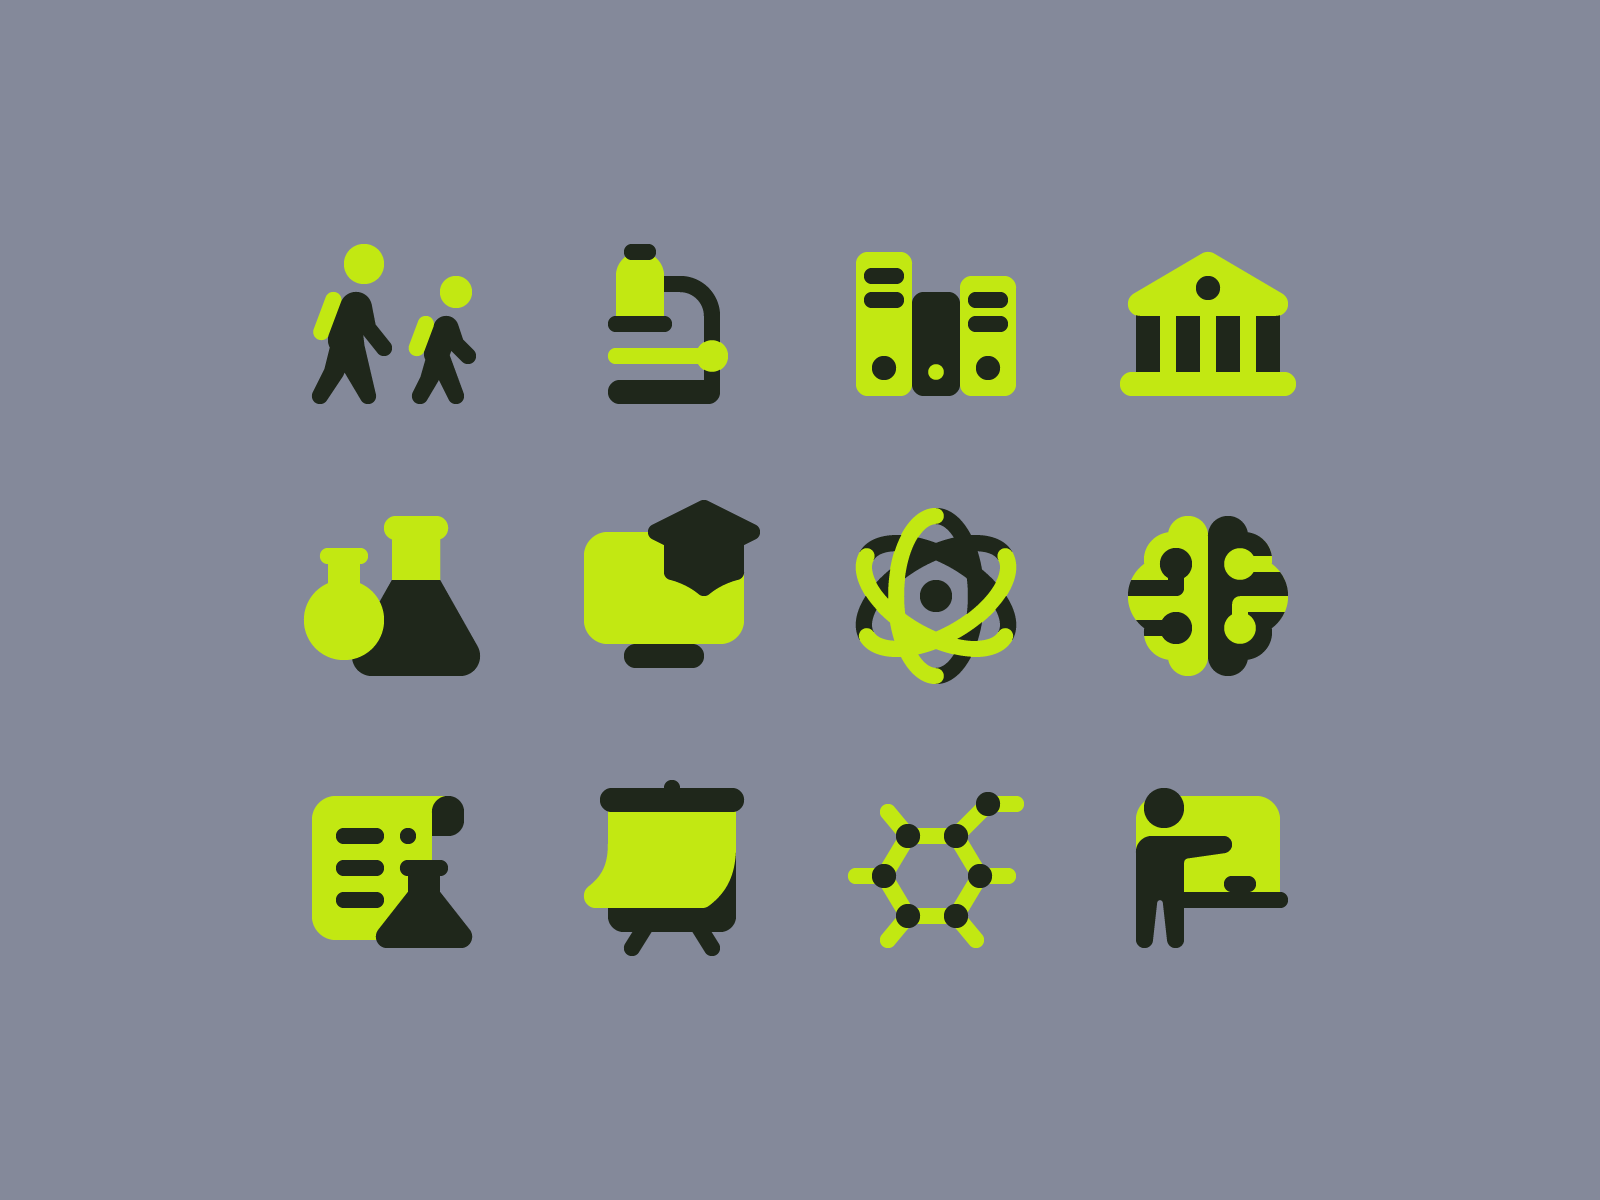 Plumpy icons: Science design digital art education app glyphs graphic design icon icon set icons icons8 online courses physics remote working school app science studying teacher two-tone ui university vector